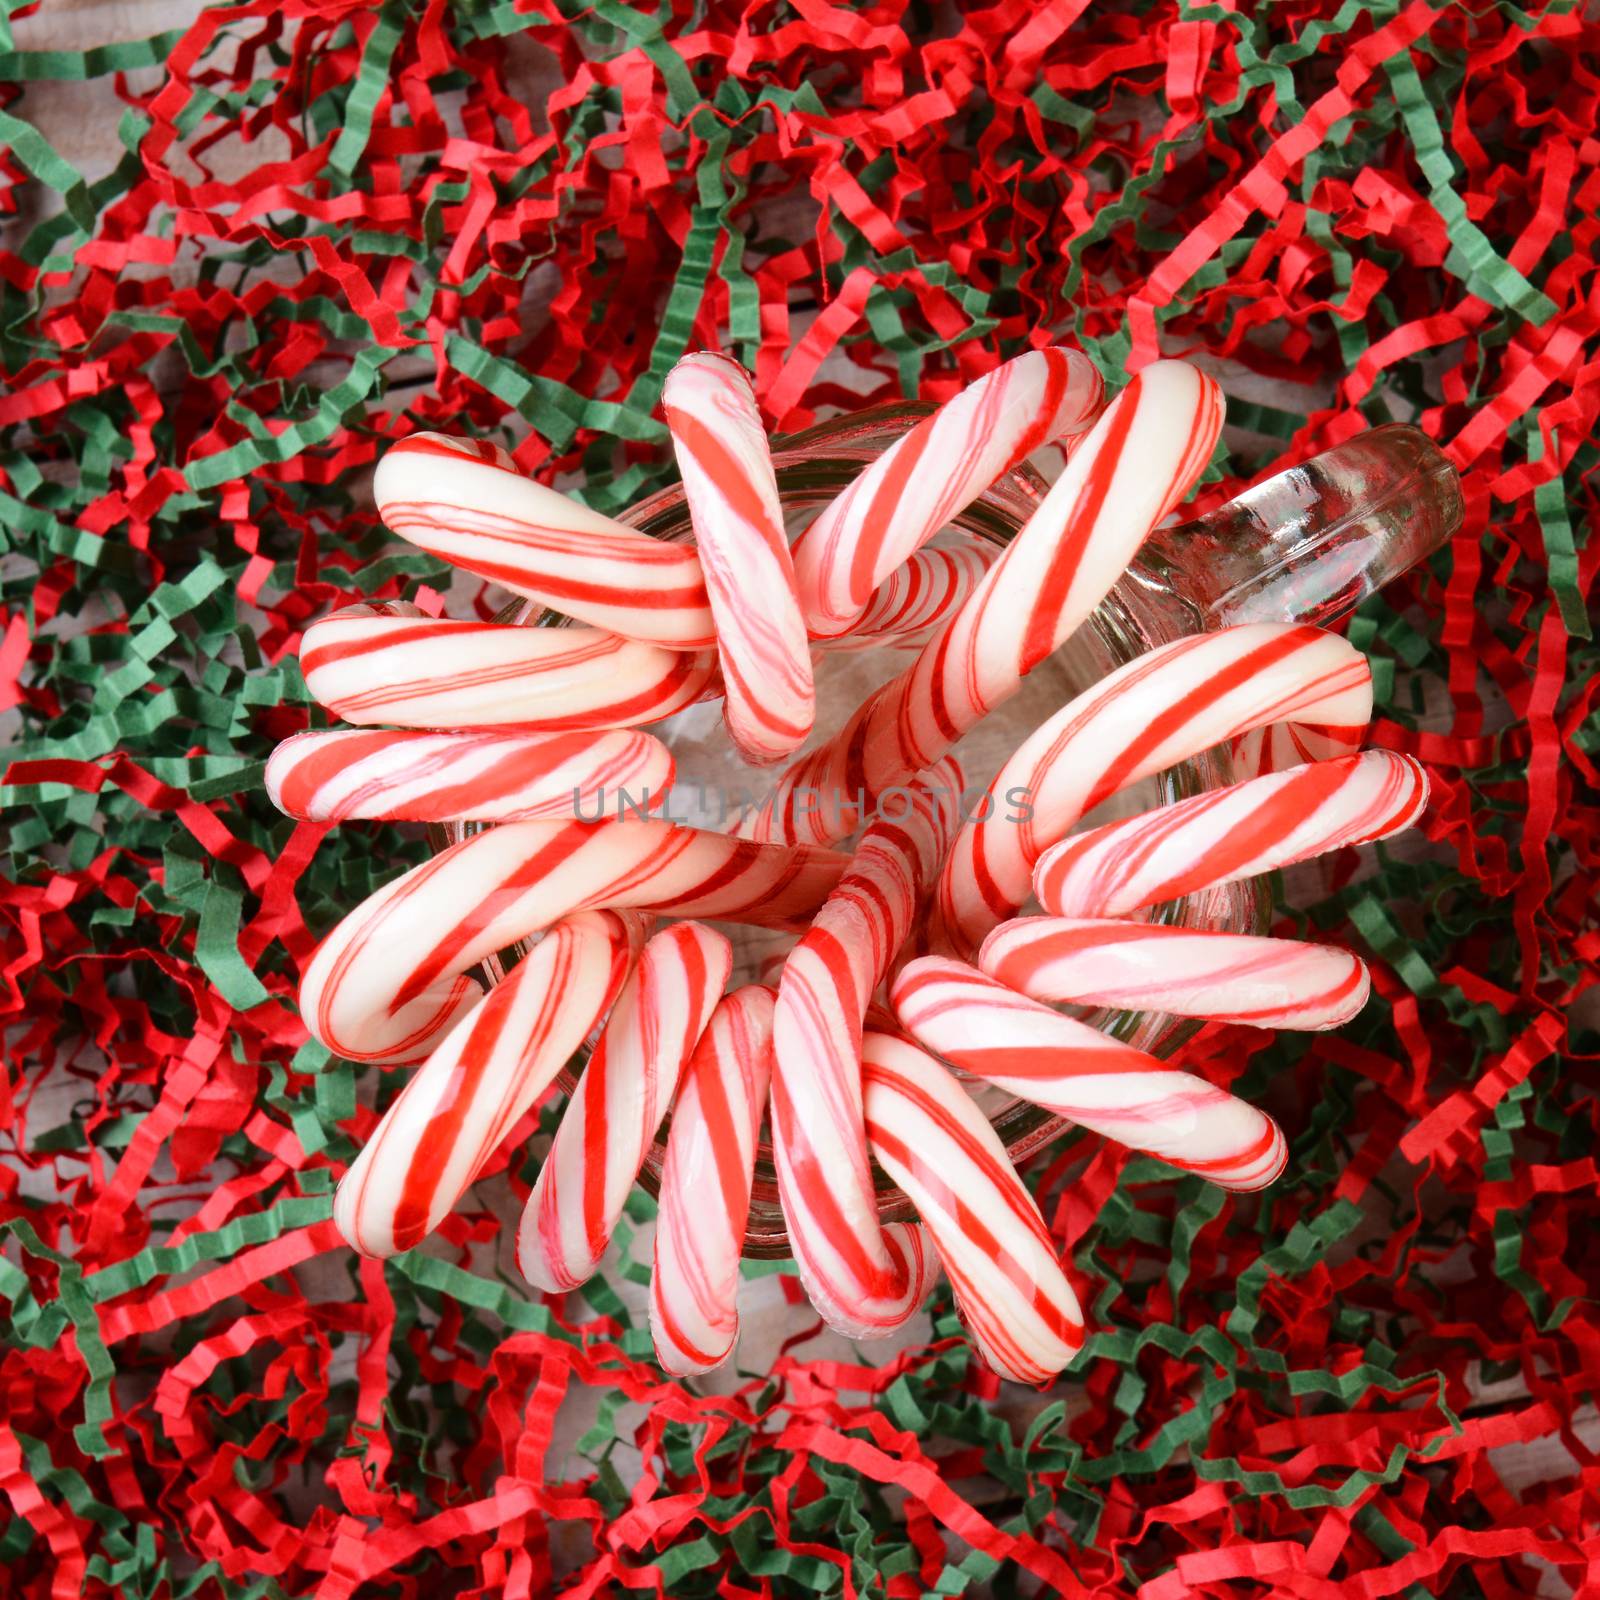 Candy Cane Jar With Crepe Paper by sCukrov